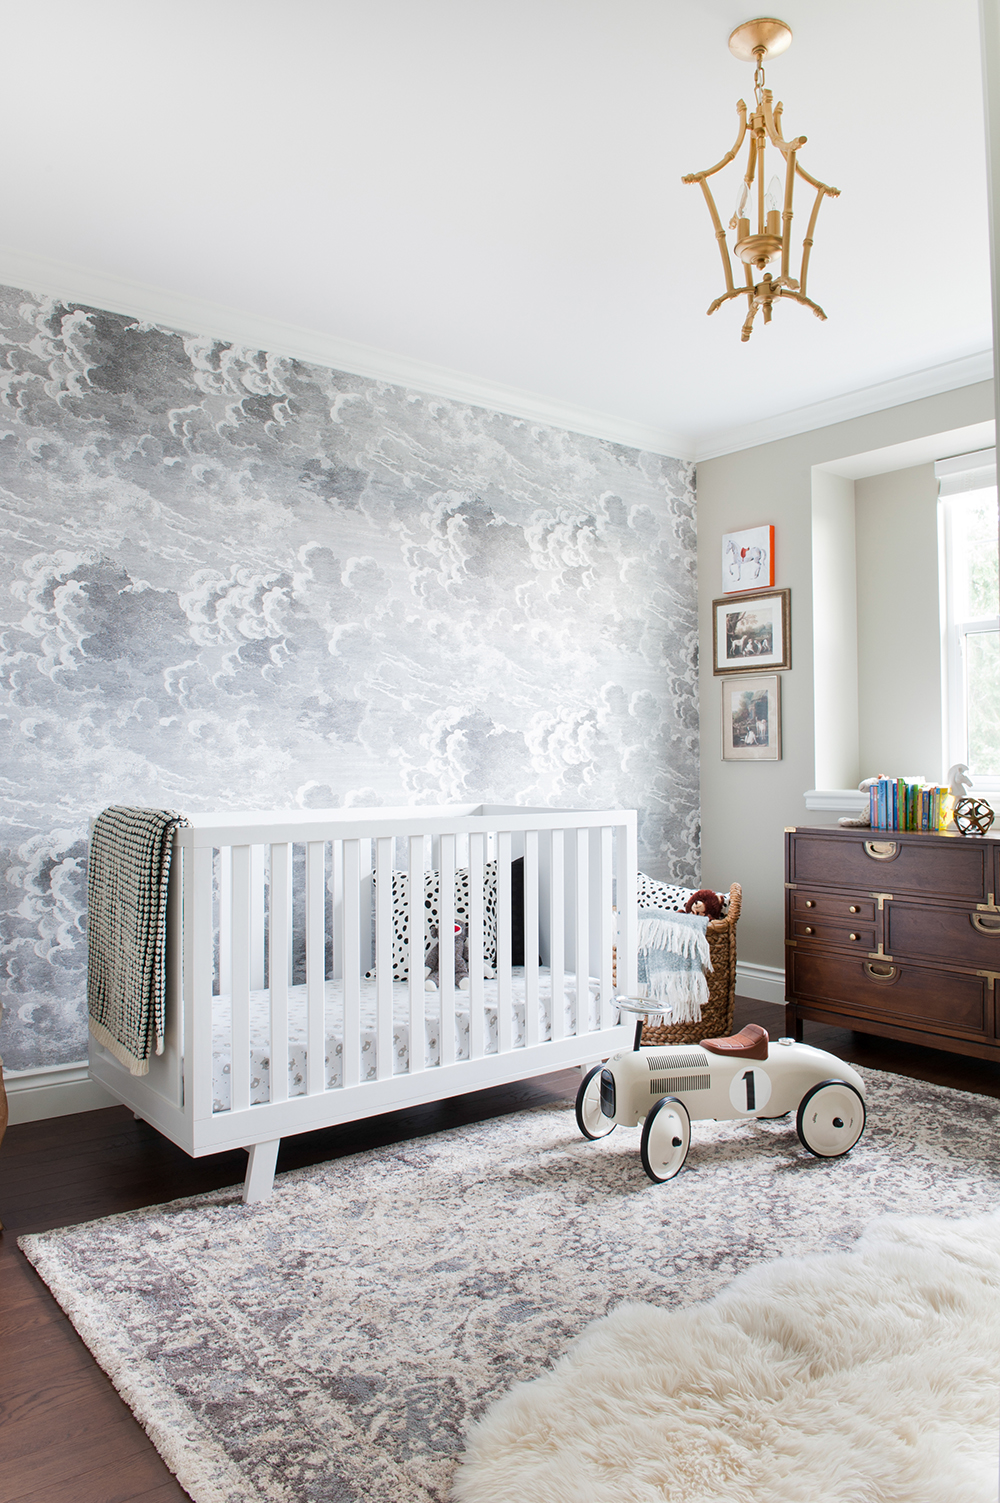 Kids' room with a cloud-inspired feature wall